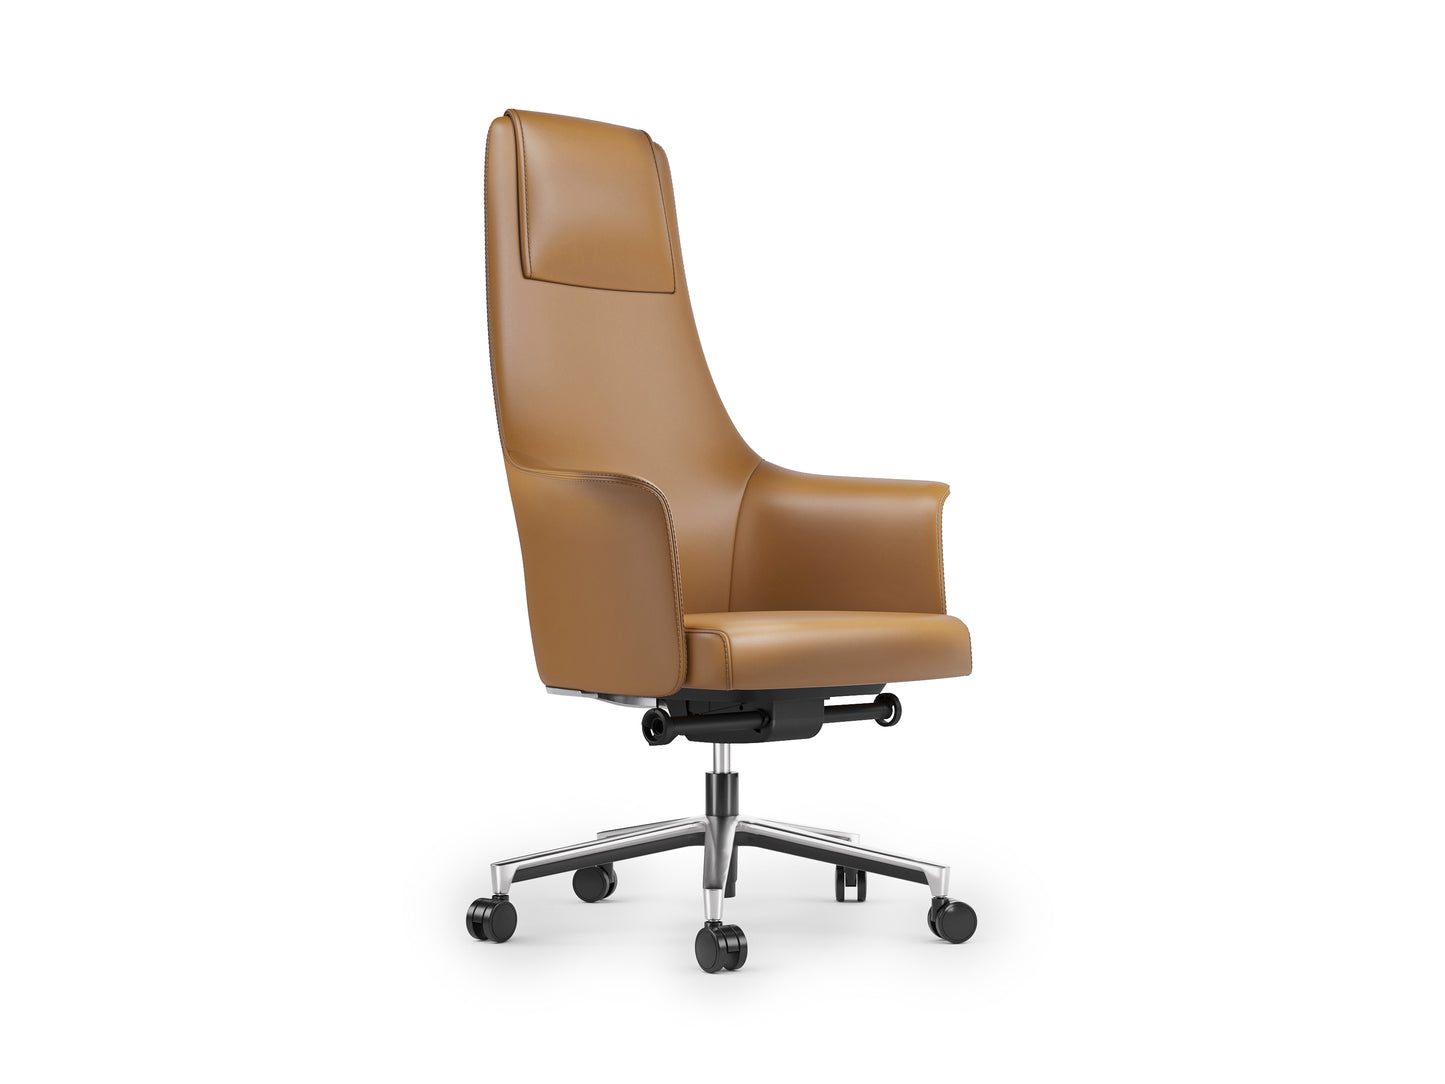 Bolo 3531 Executive Leather Office Chair